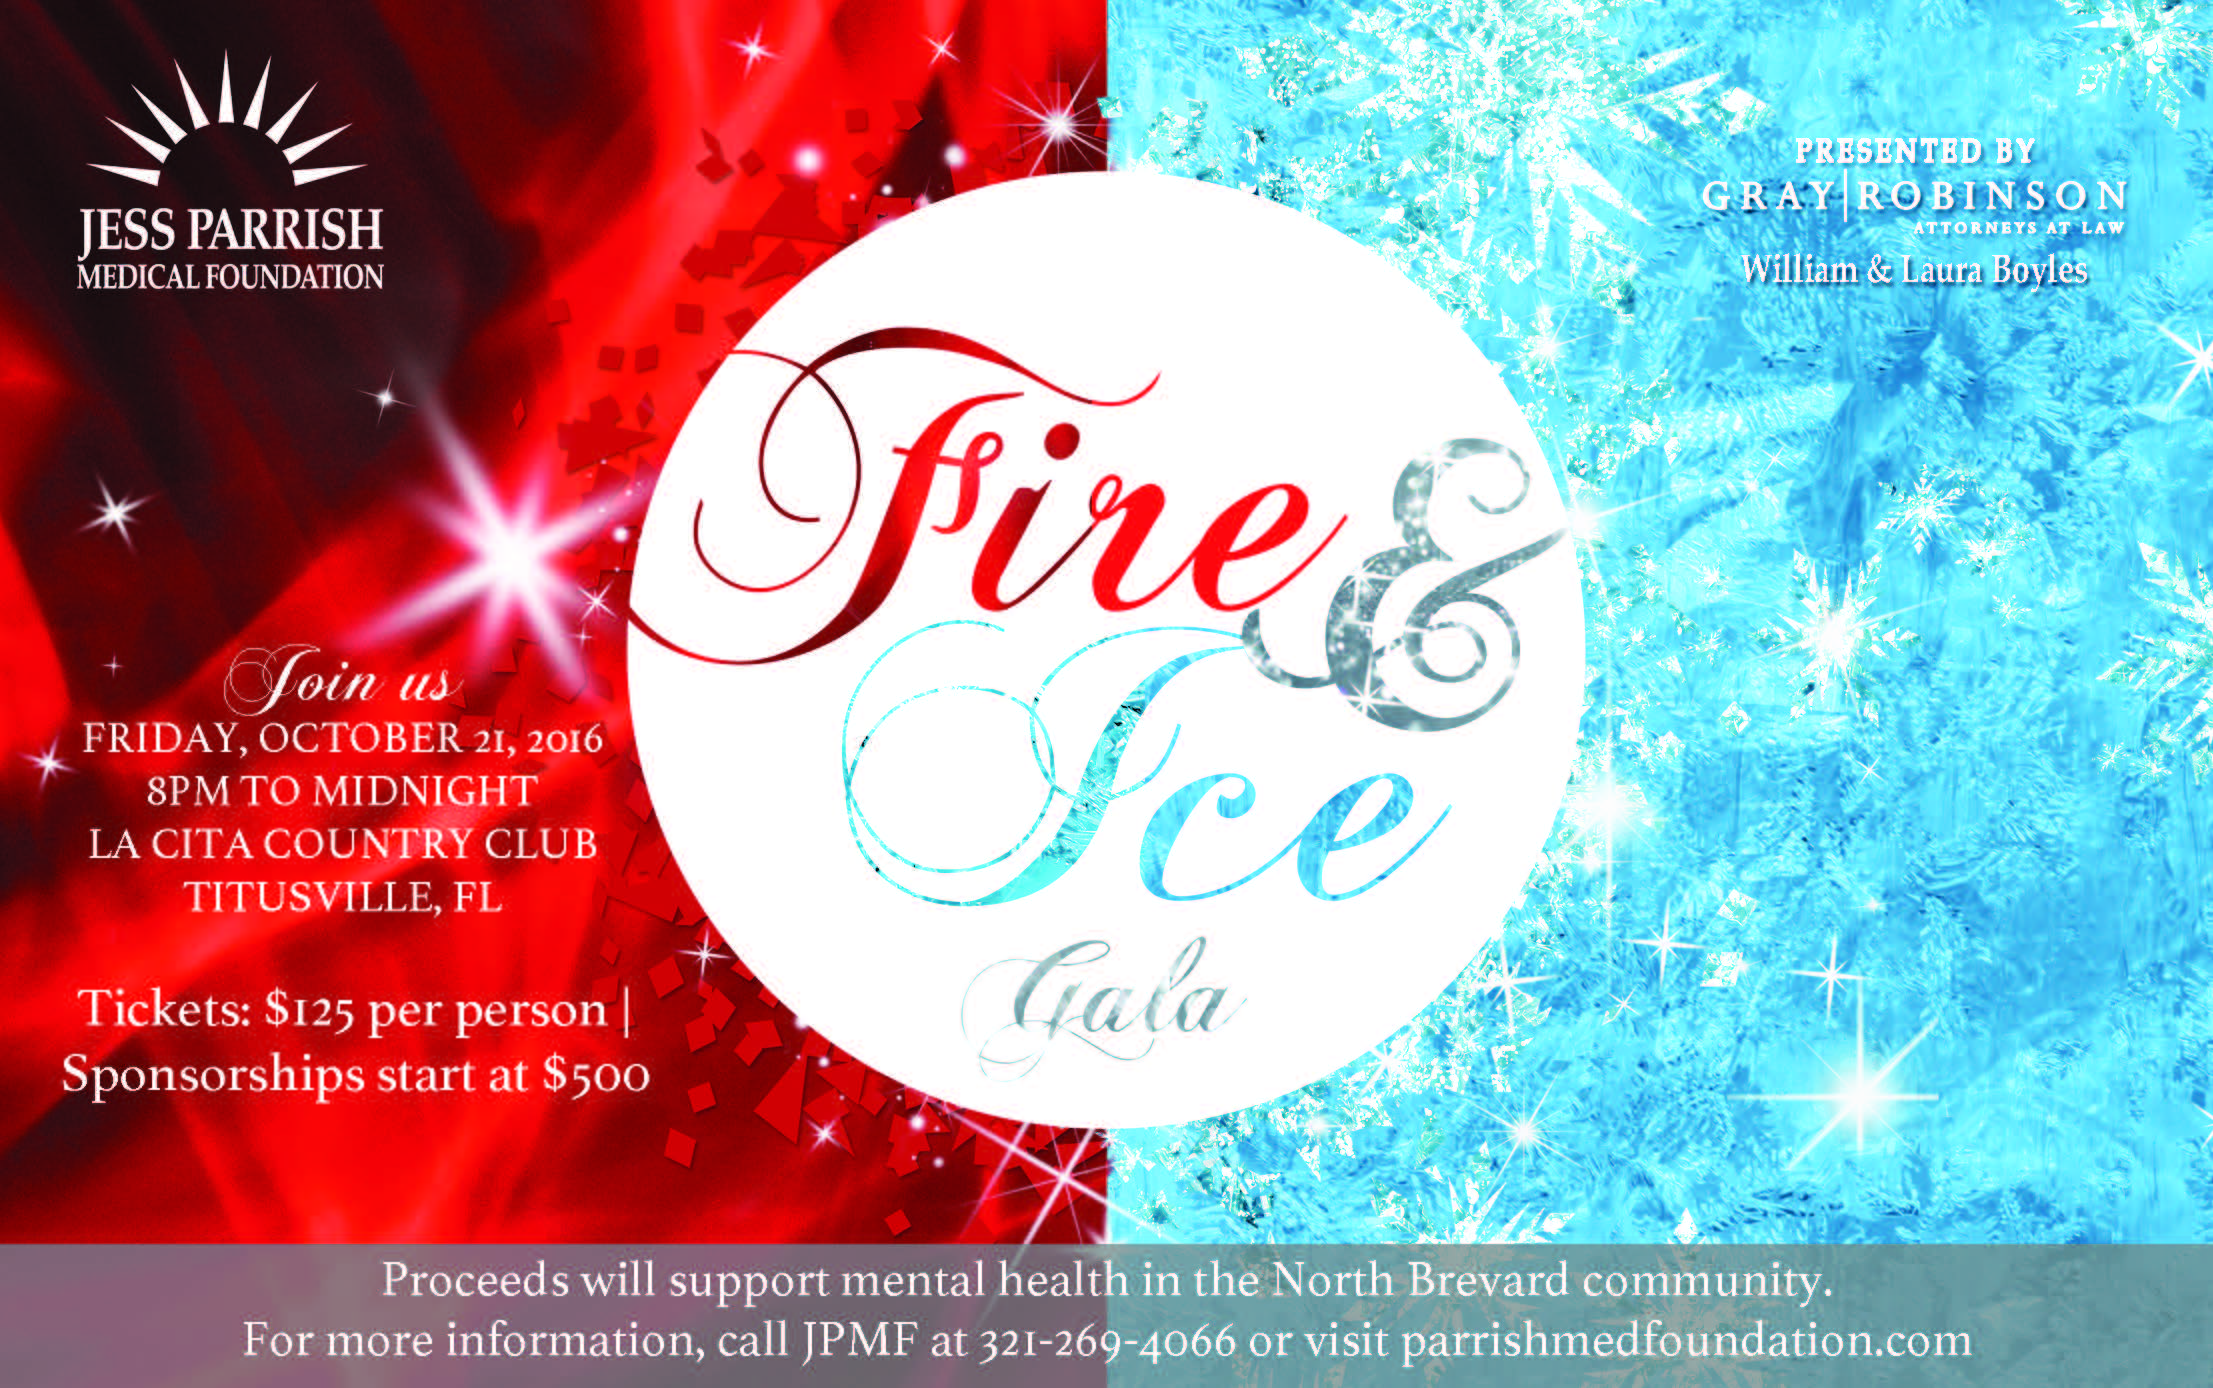 Fire & Ice Gala Titusville FL Chamber of Commerce